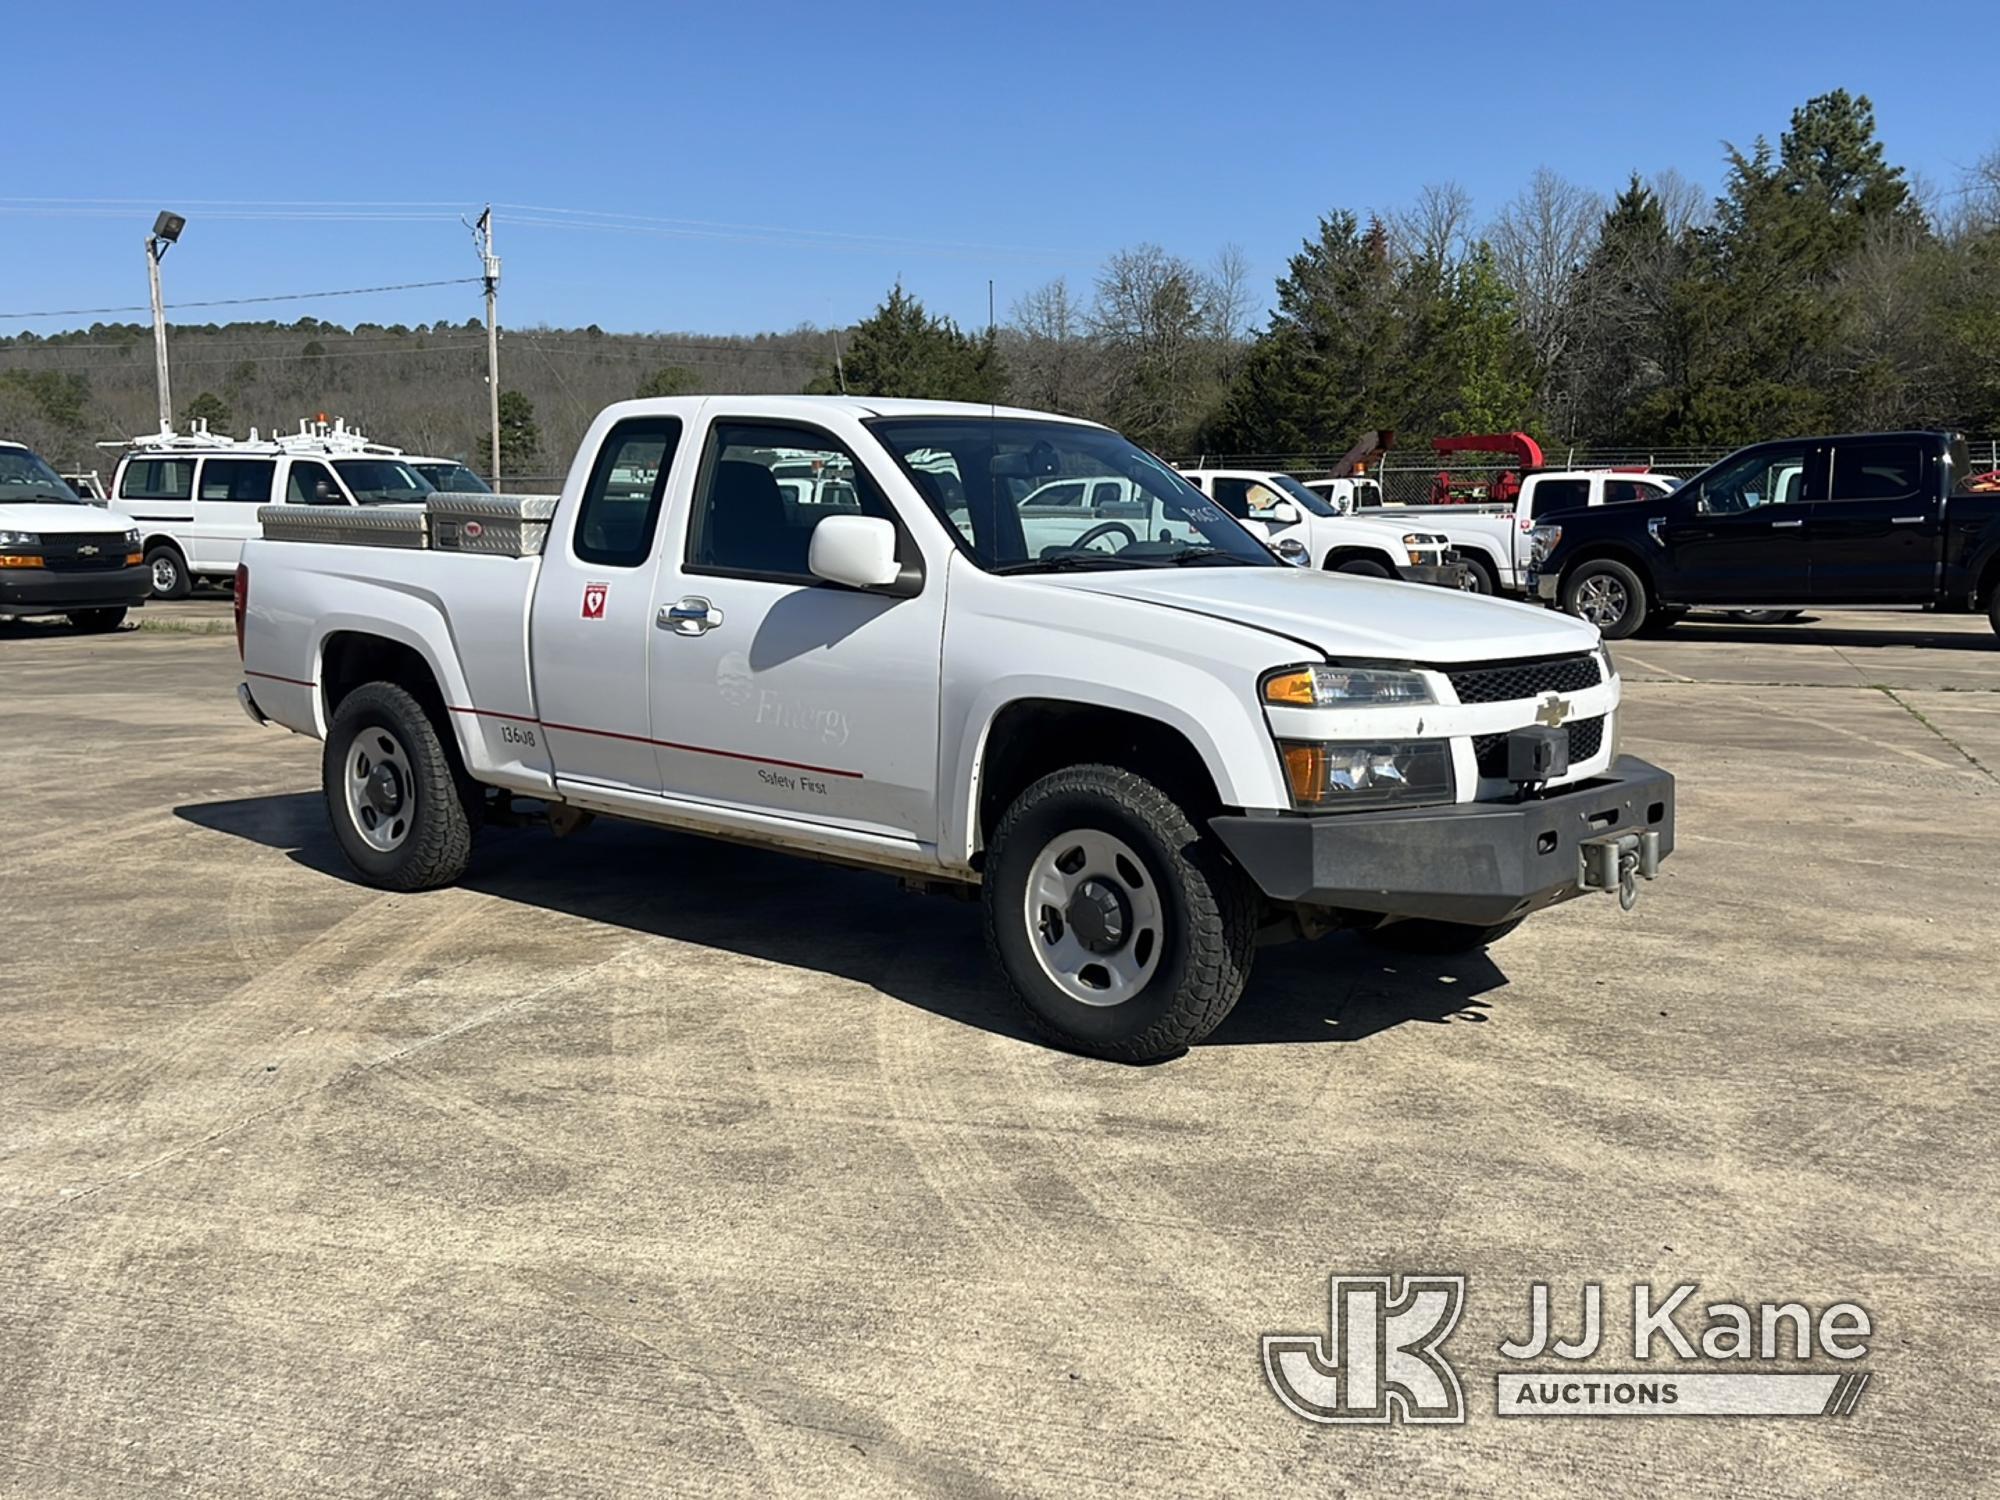 (Conway, AR) 2012 Chevrolet Colorado 4x4 Extended-Cab Pickup Truck Jump to Start, Runs, Moves) (Low